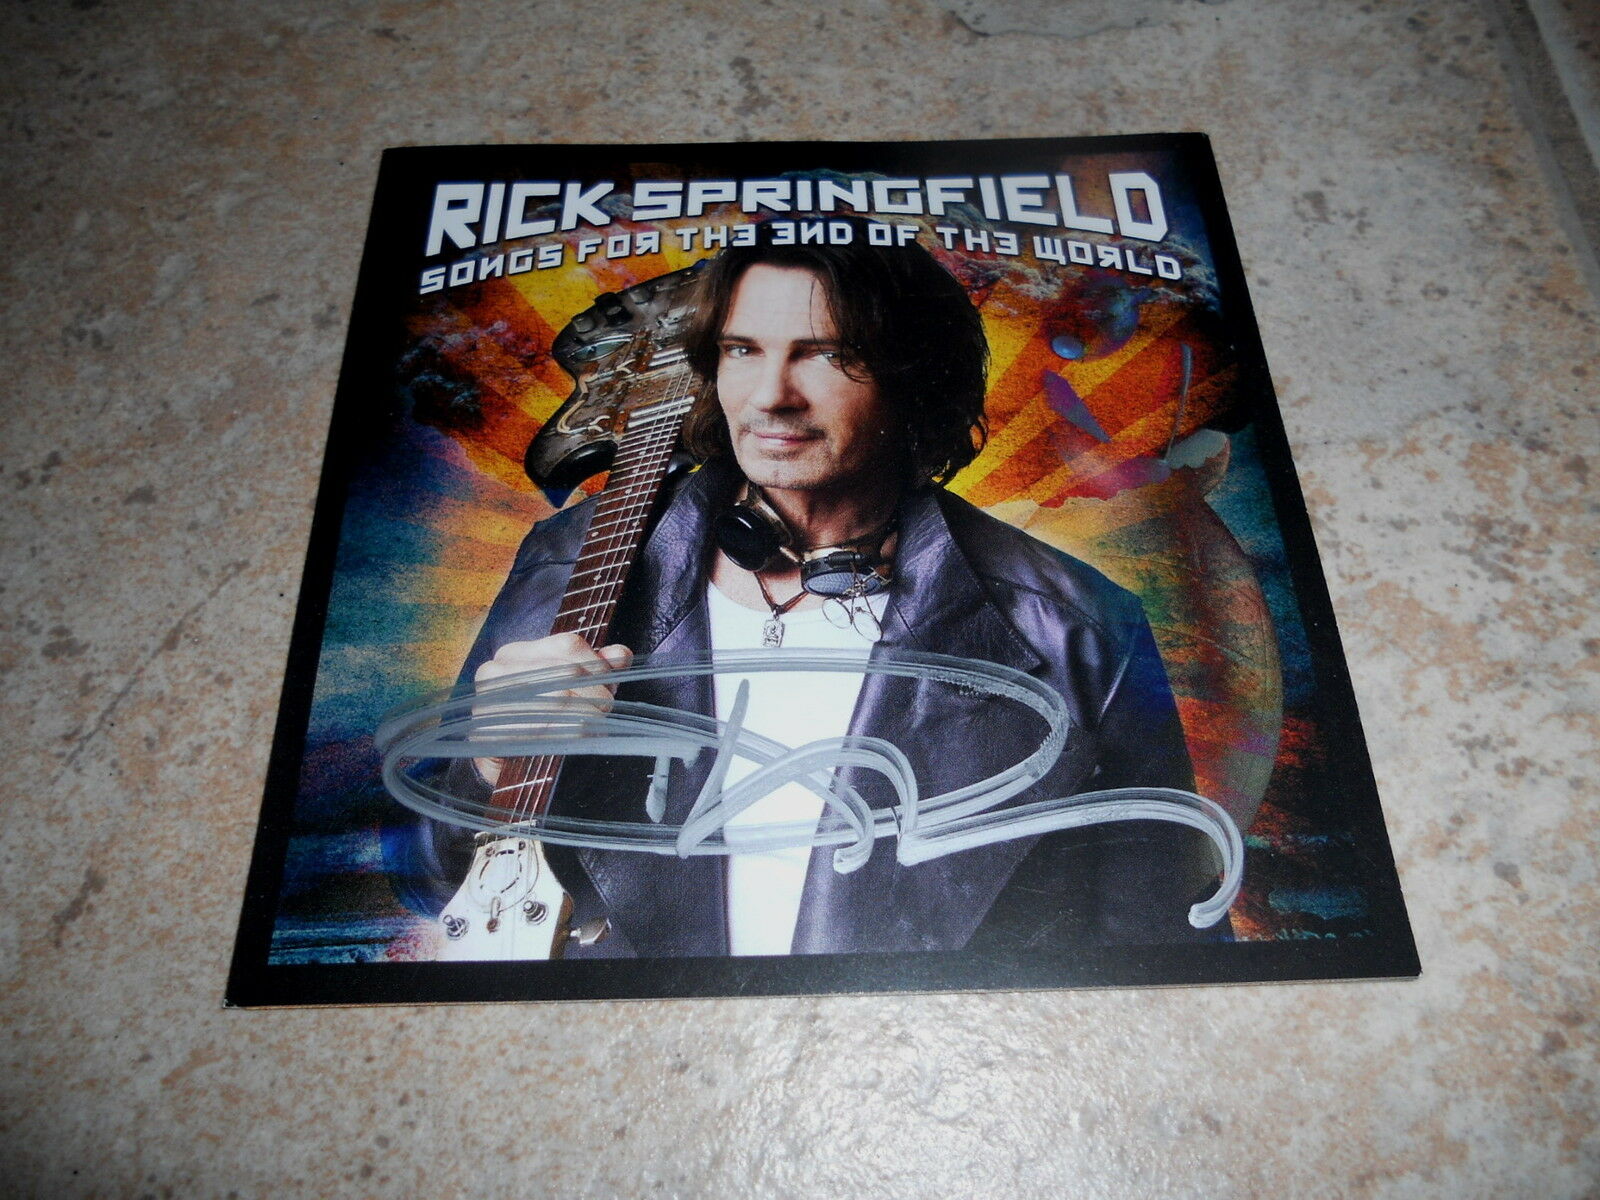 RICK SPRINGFIELD SONGS FOR THE END WORLD SIGNED AUTOGRAPHED CD BOOK COVER PHOTO COLLECTIBLE MEMORABILIA